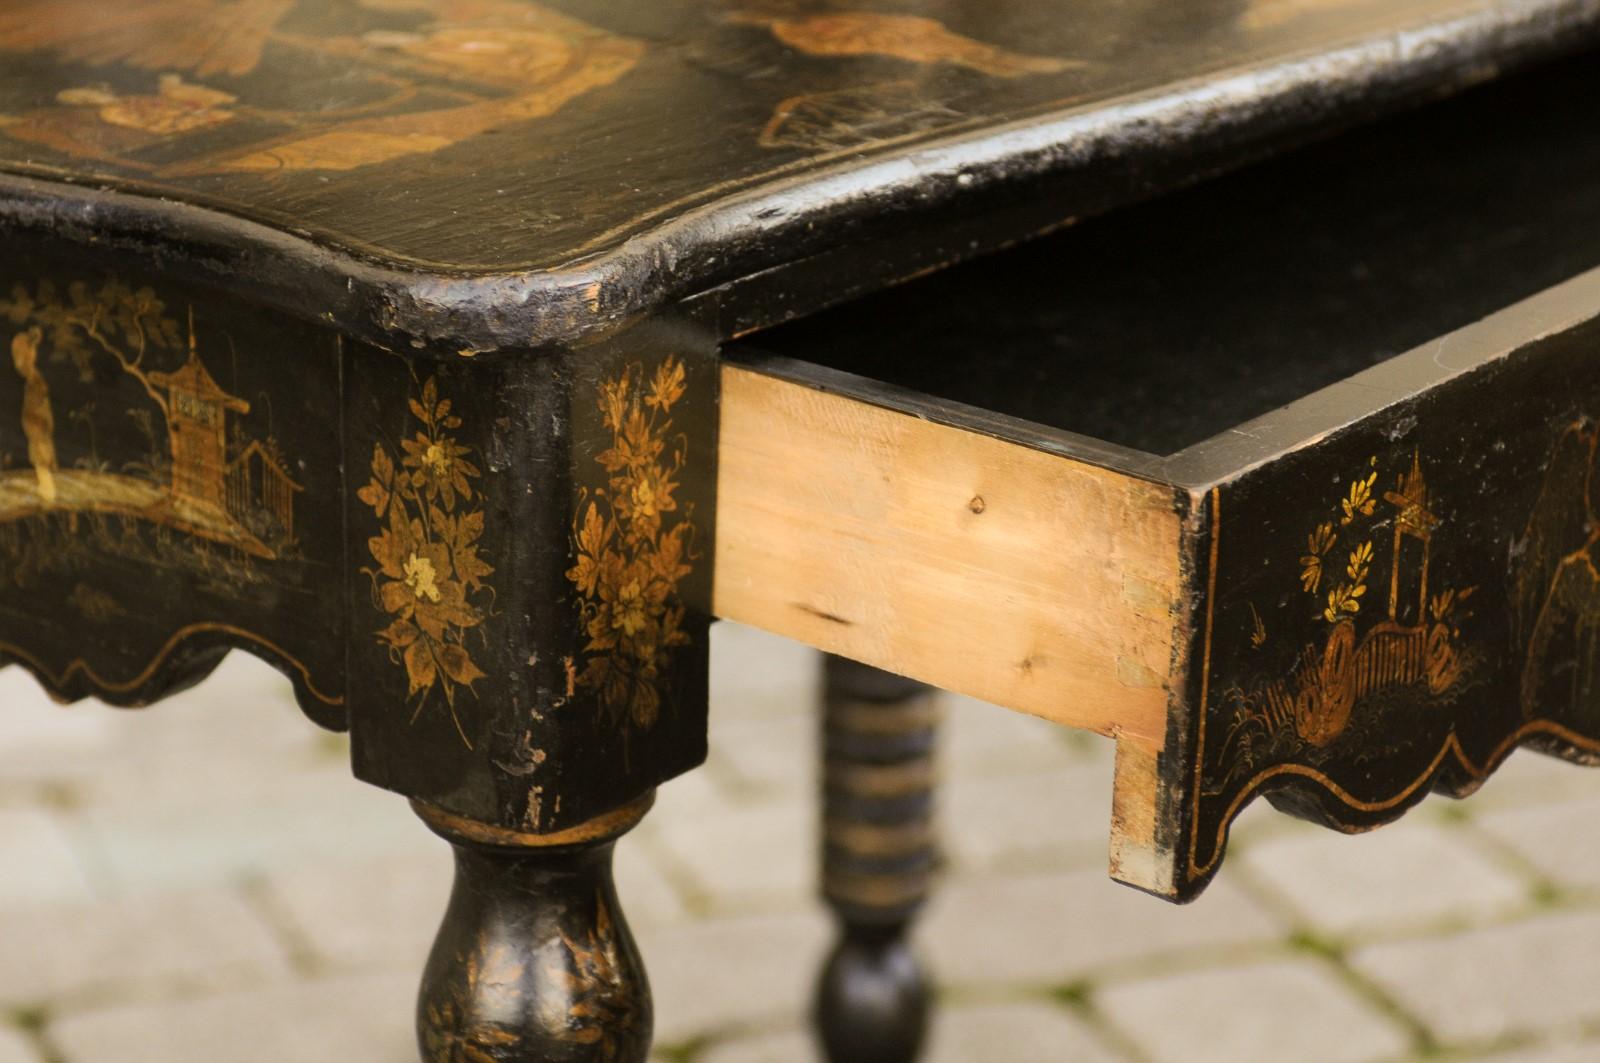 English 1850s Chinoiserie Table with Ebonized Wood and Hand Painted Décor 9